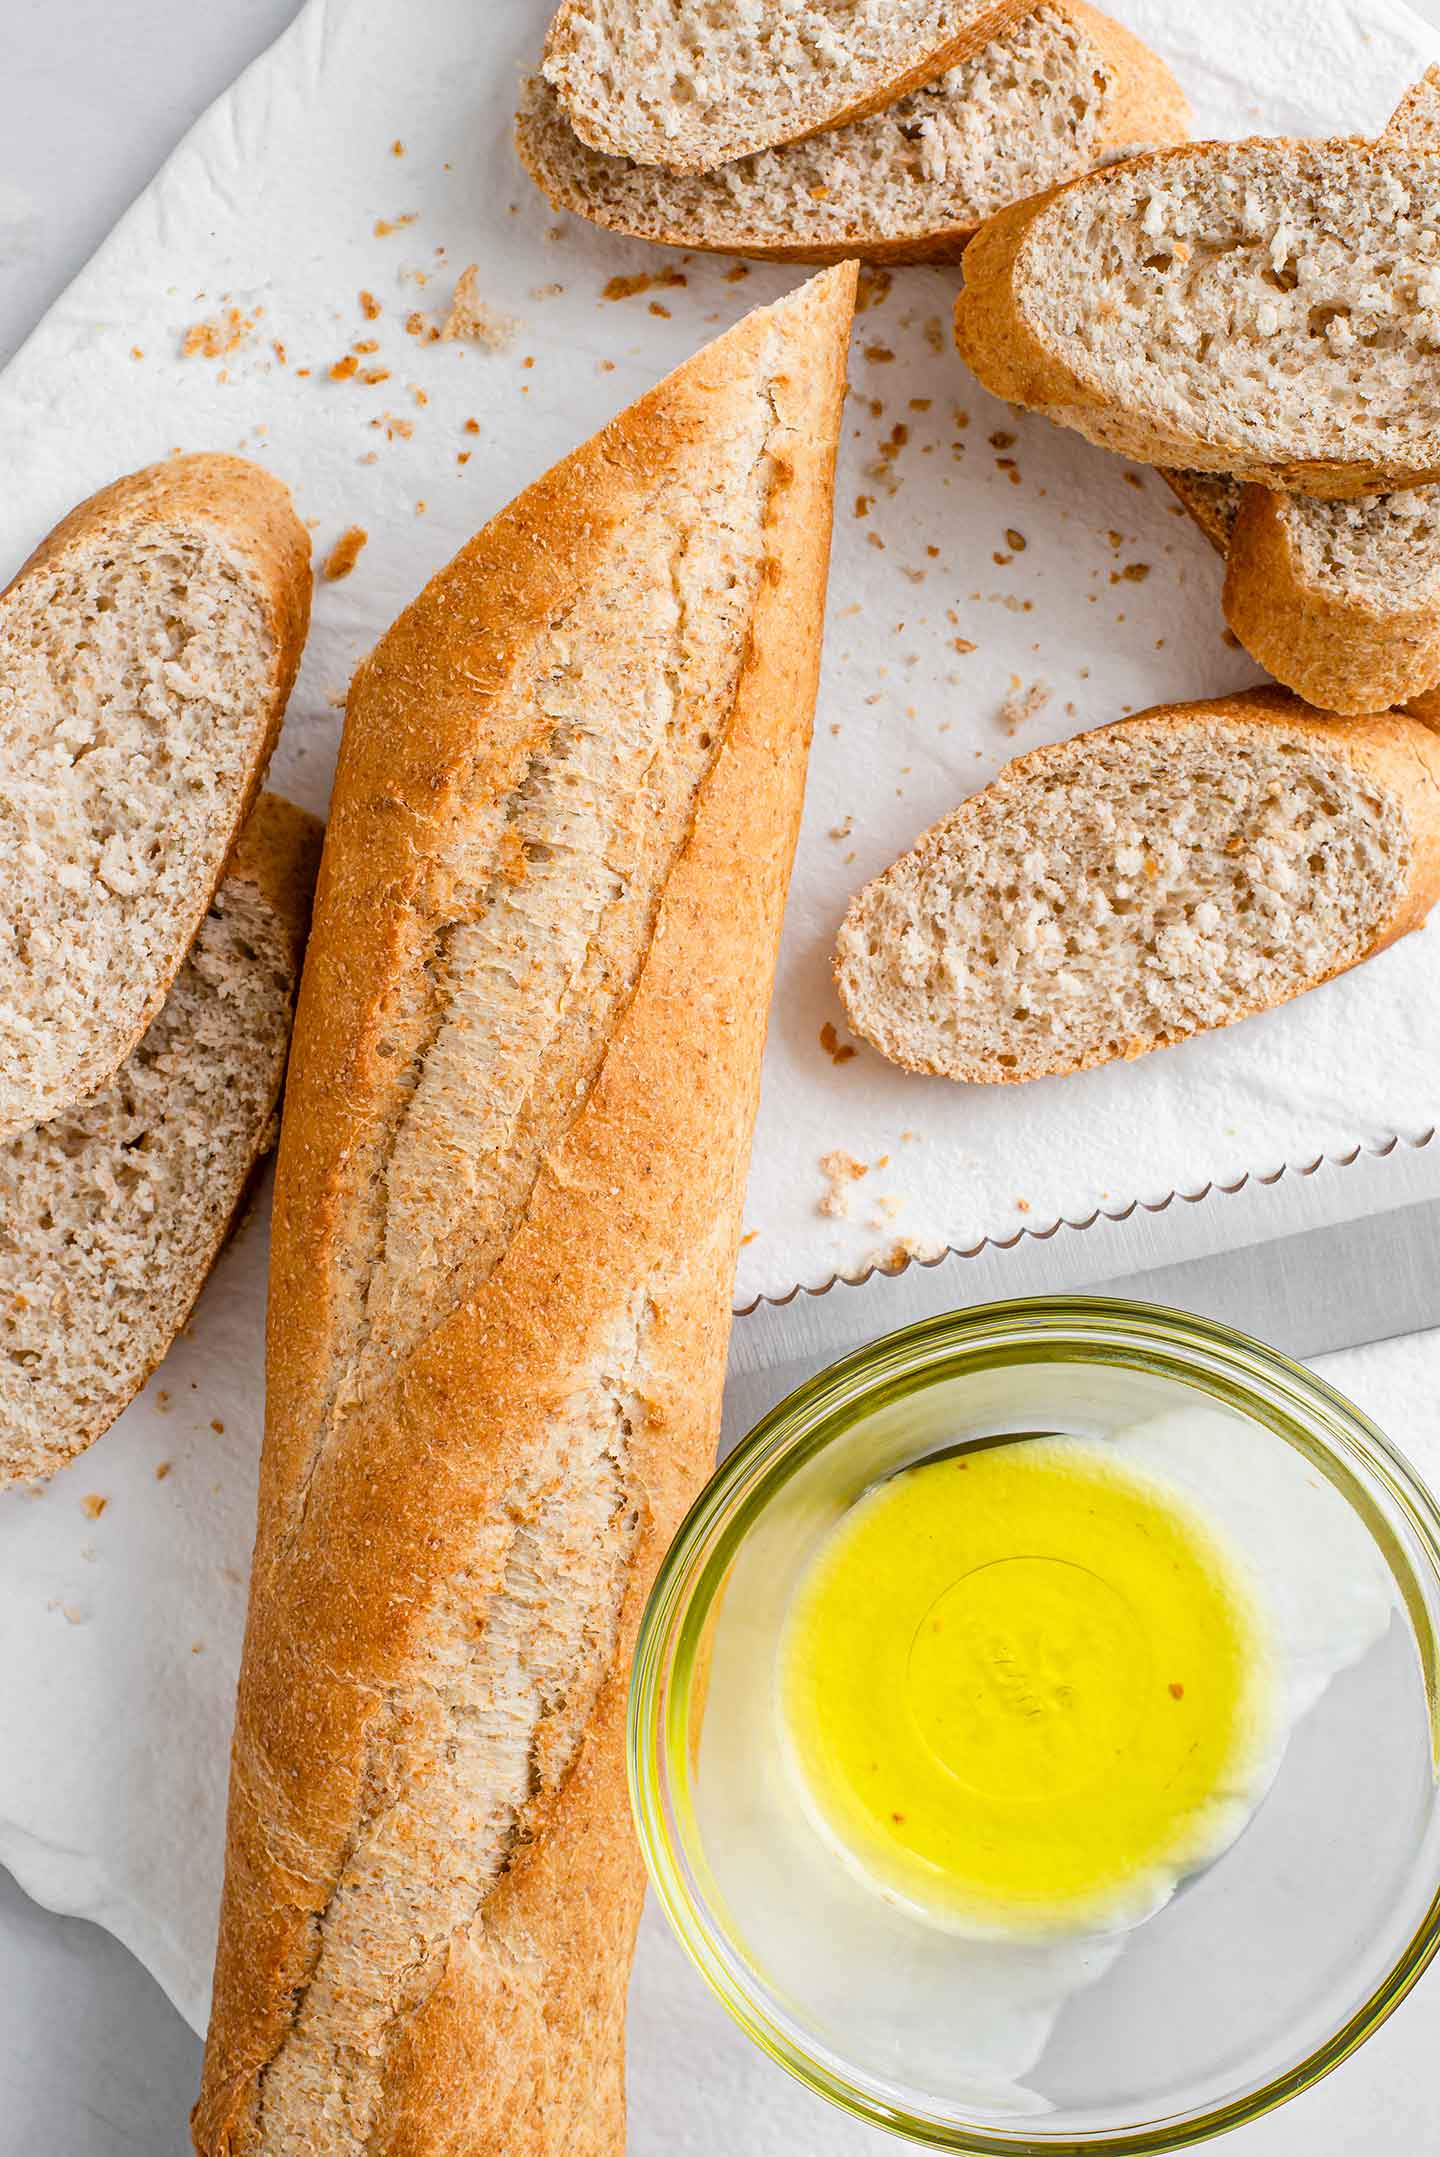 Top down view of a whole wheat baguette being sliced into thin crostini's. Olive oil is in a small glass bowl next to the bread.